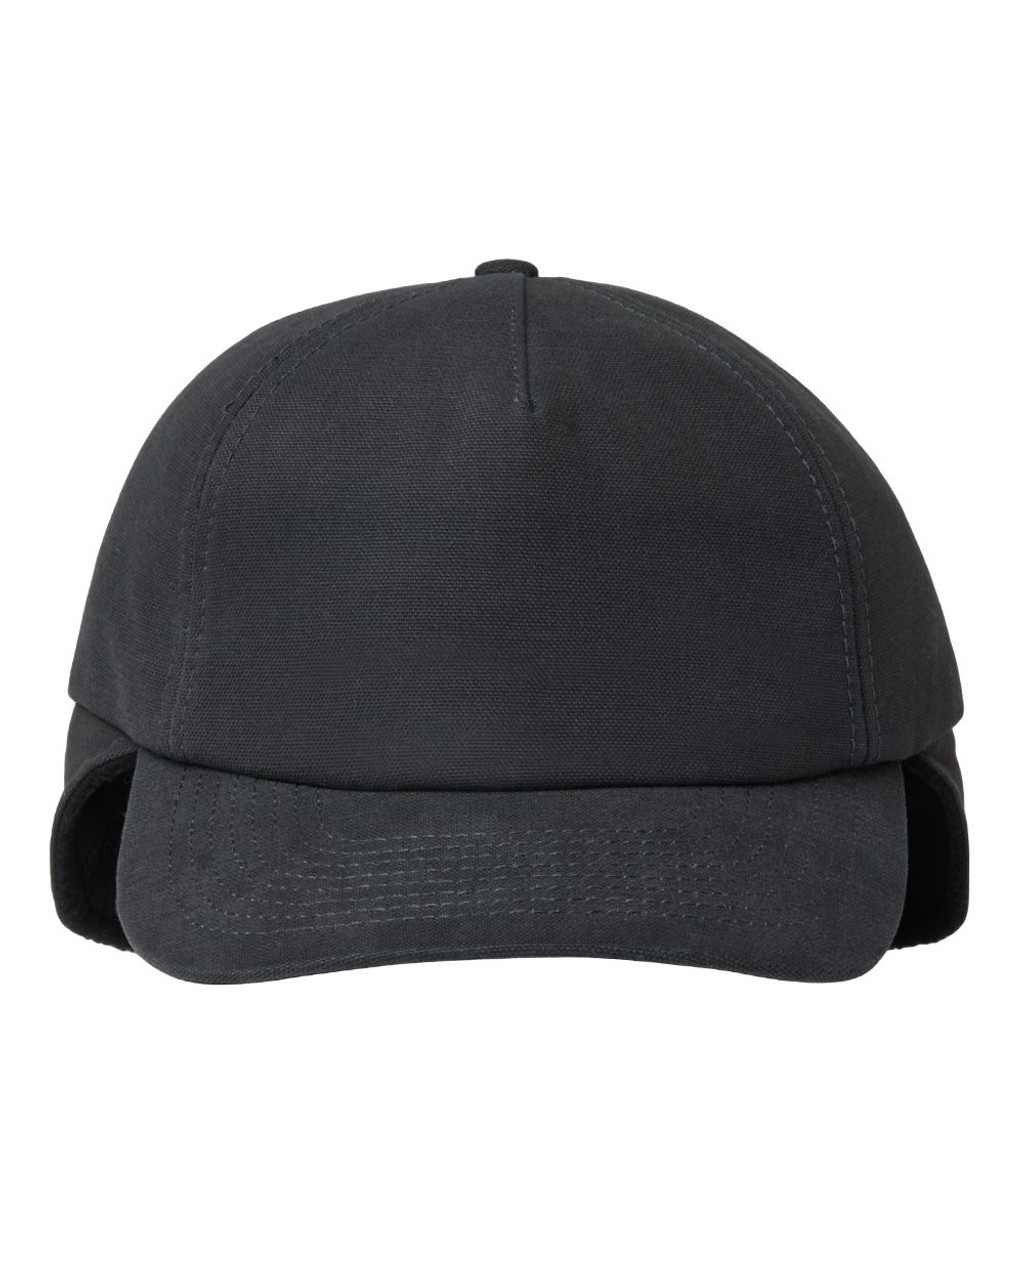 Custom Embroidered Extreme Cold Canvas Cap - 3753